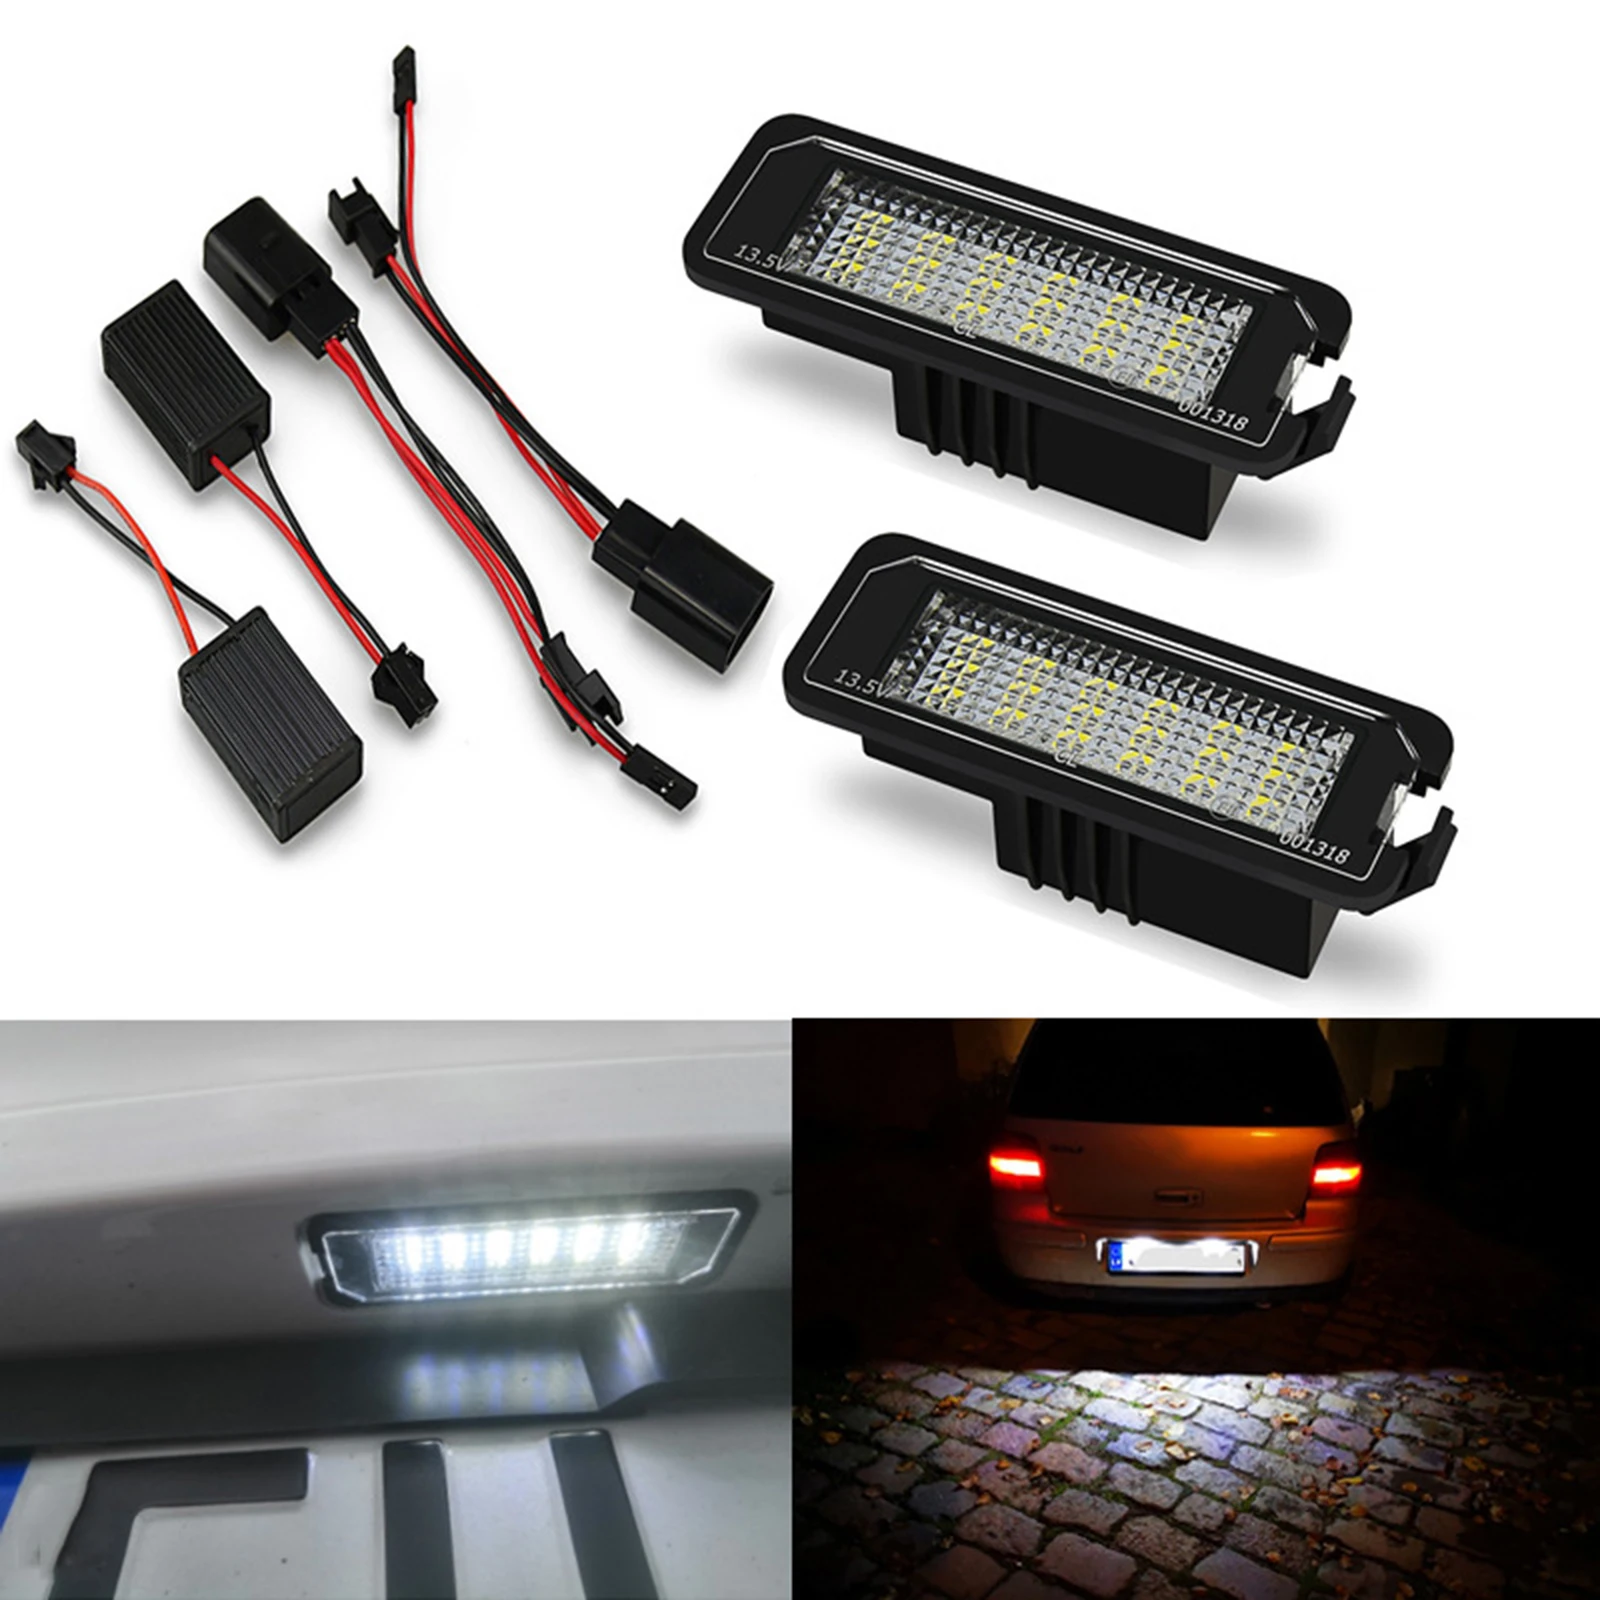 2x Car LED Number License Number Plate Light Lamp Bulb Assembly Fits for VW Golf Passat CC Eos